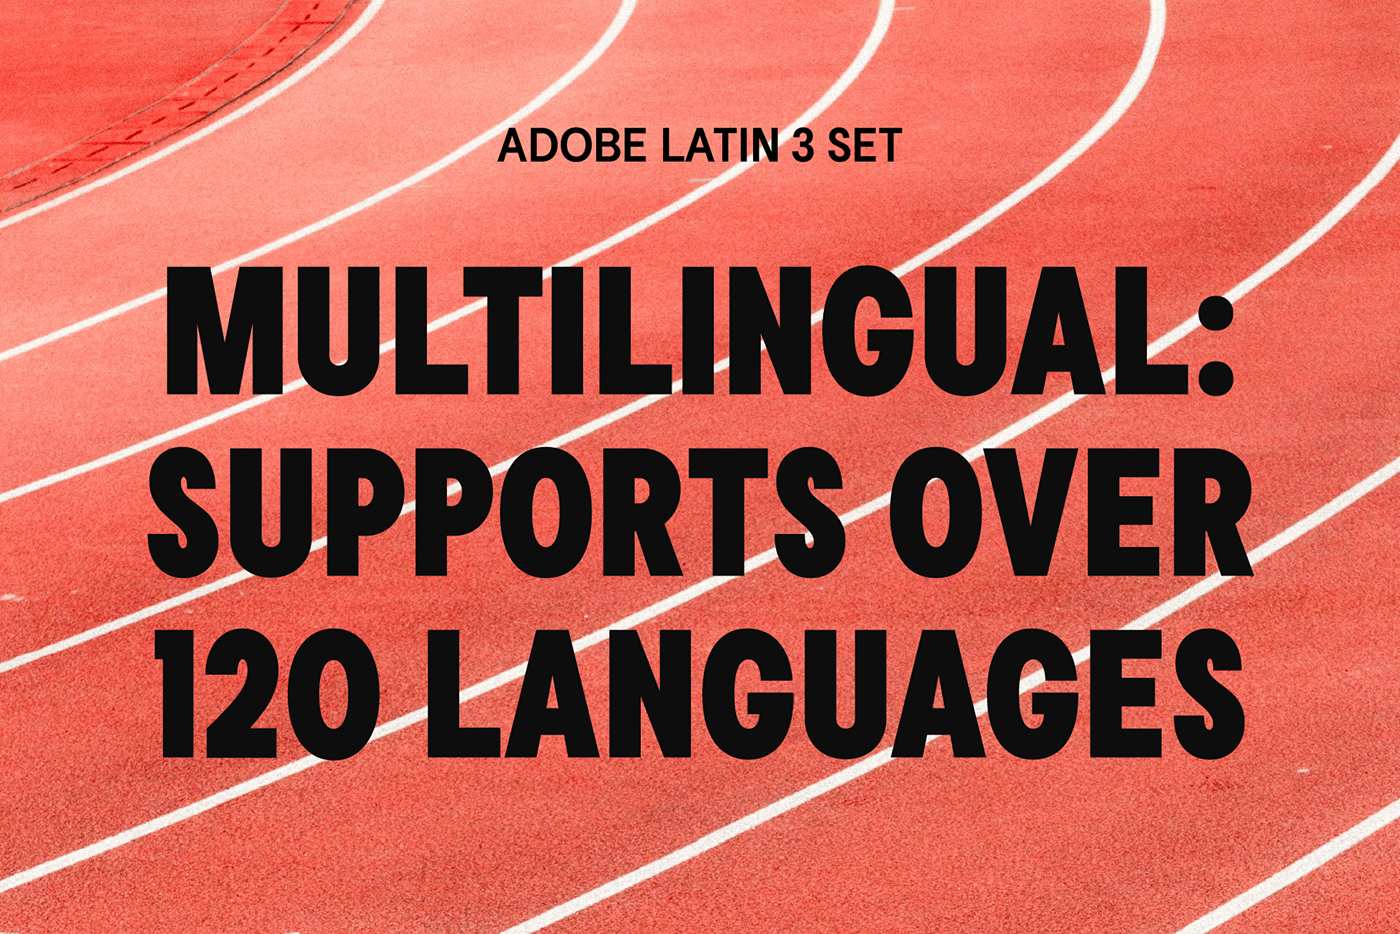 support for over 120 languages Adobe latin 3 support